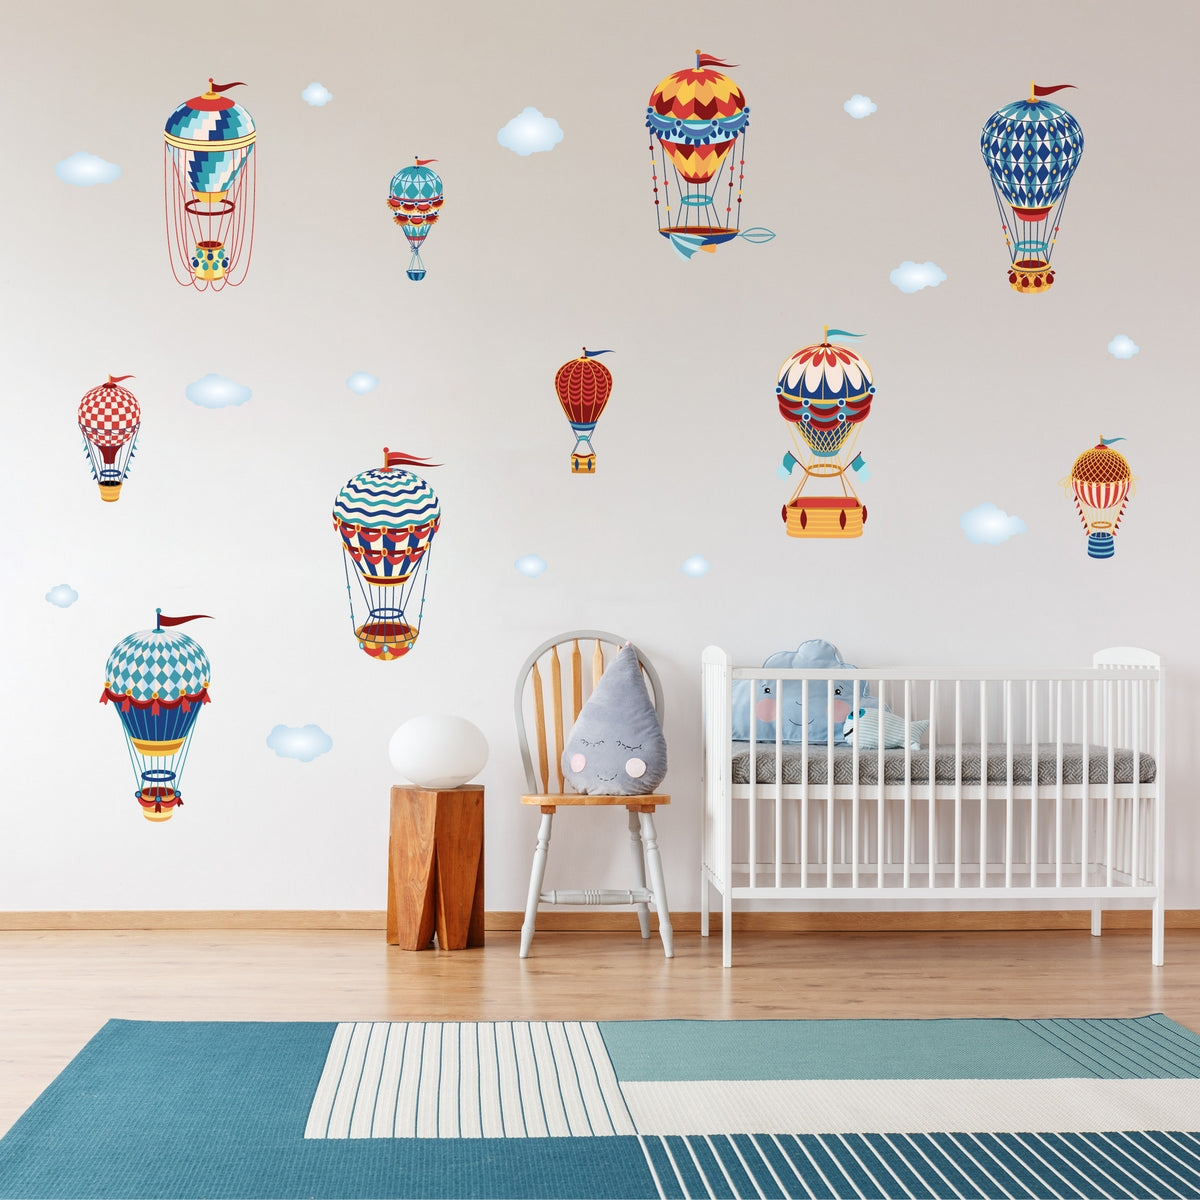 Decalcomania Wall Decor Hot Air Balloon Wall Decals - Set of 10 Aircraft Decoration Decal Removable Peel and Stick Decals - 7.5 inch Wall dcor